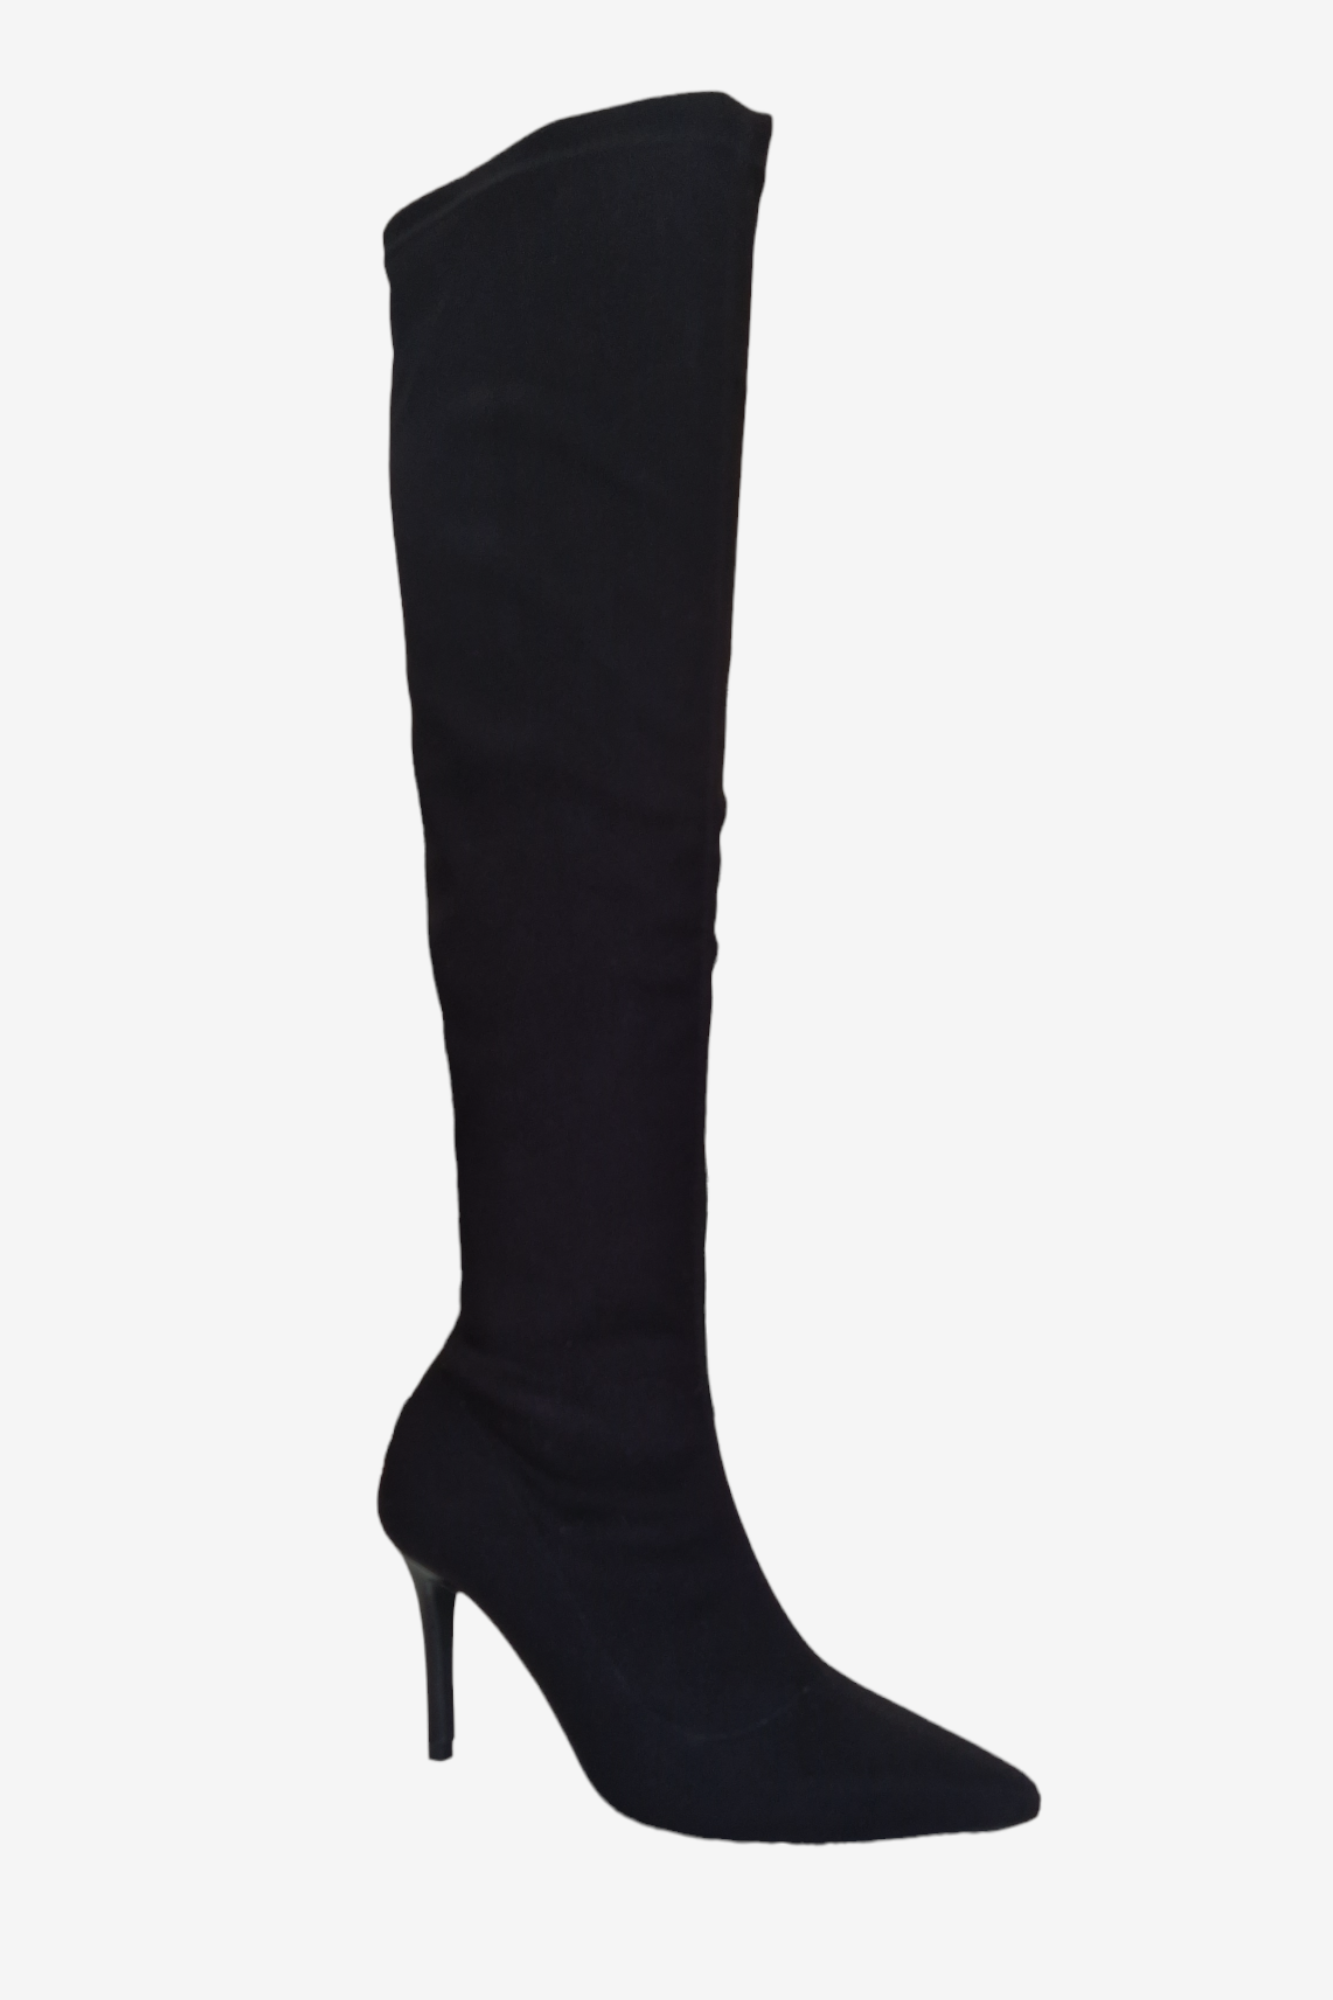 MARIAN BLACK LYRCA LEATHER LINED OVER THE KNEE BOOTS